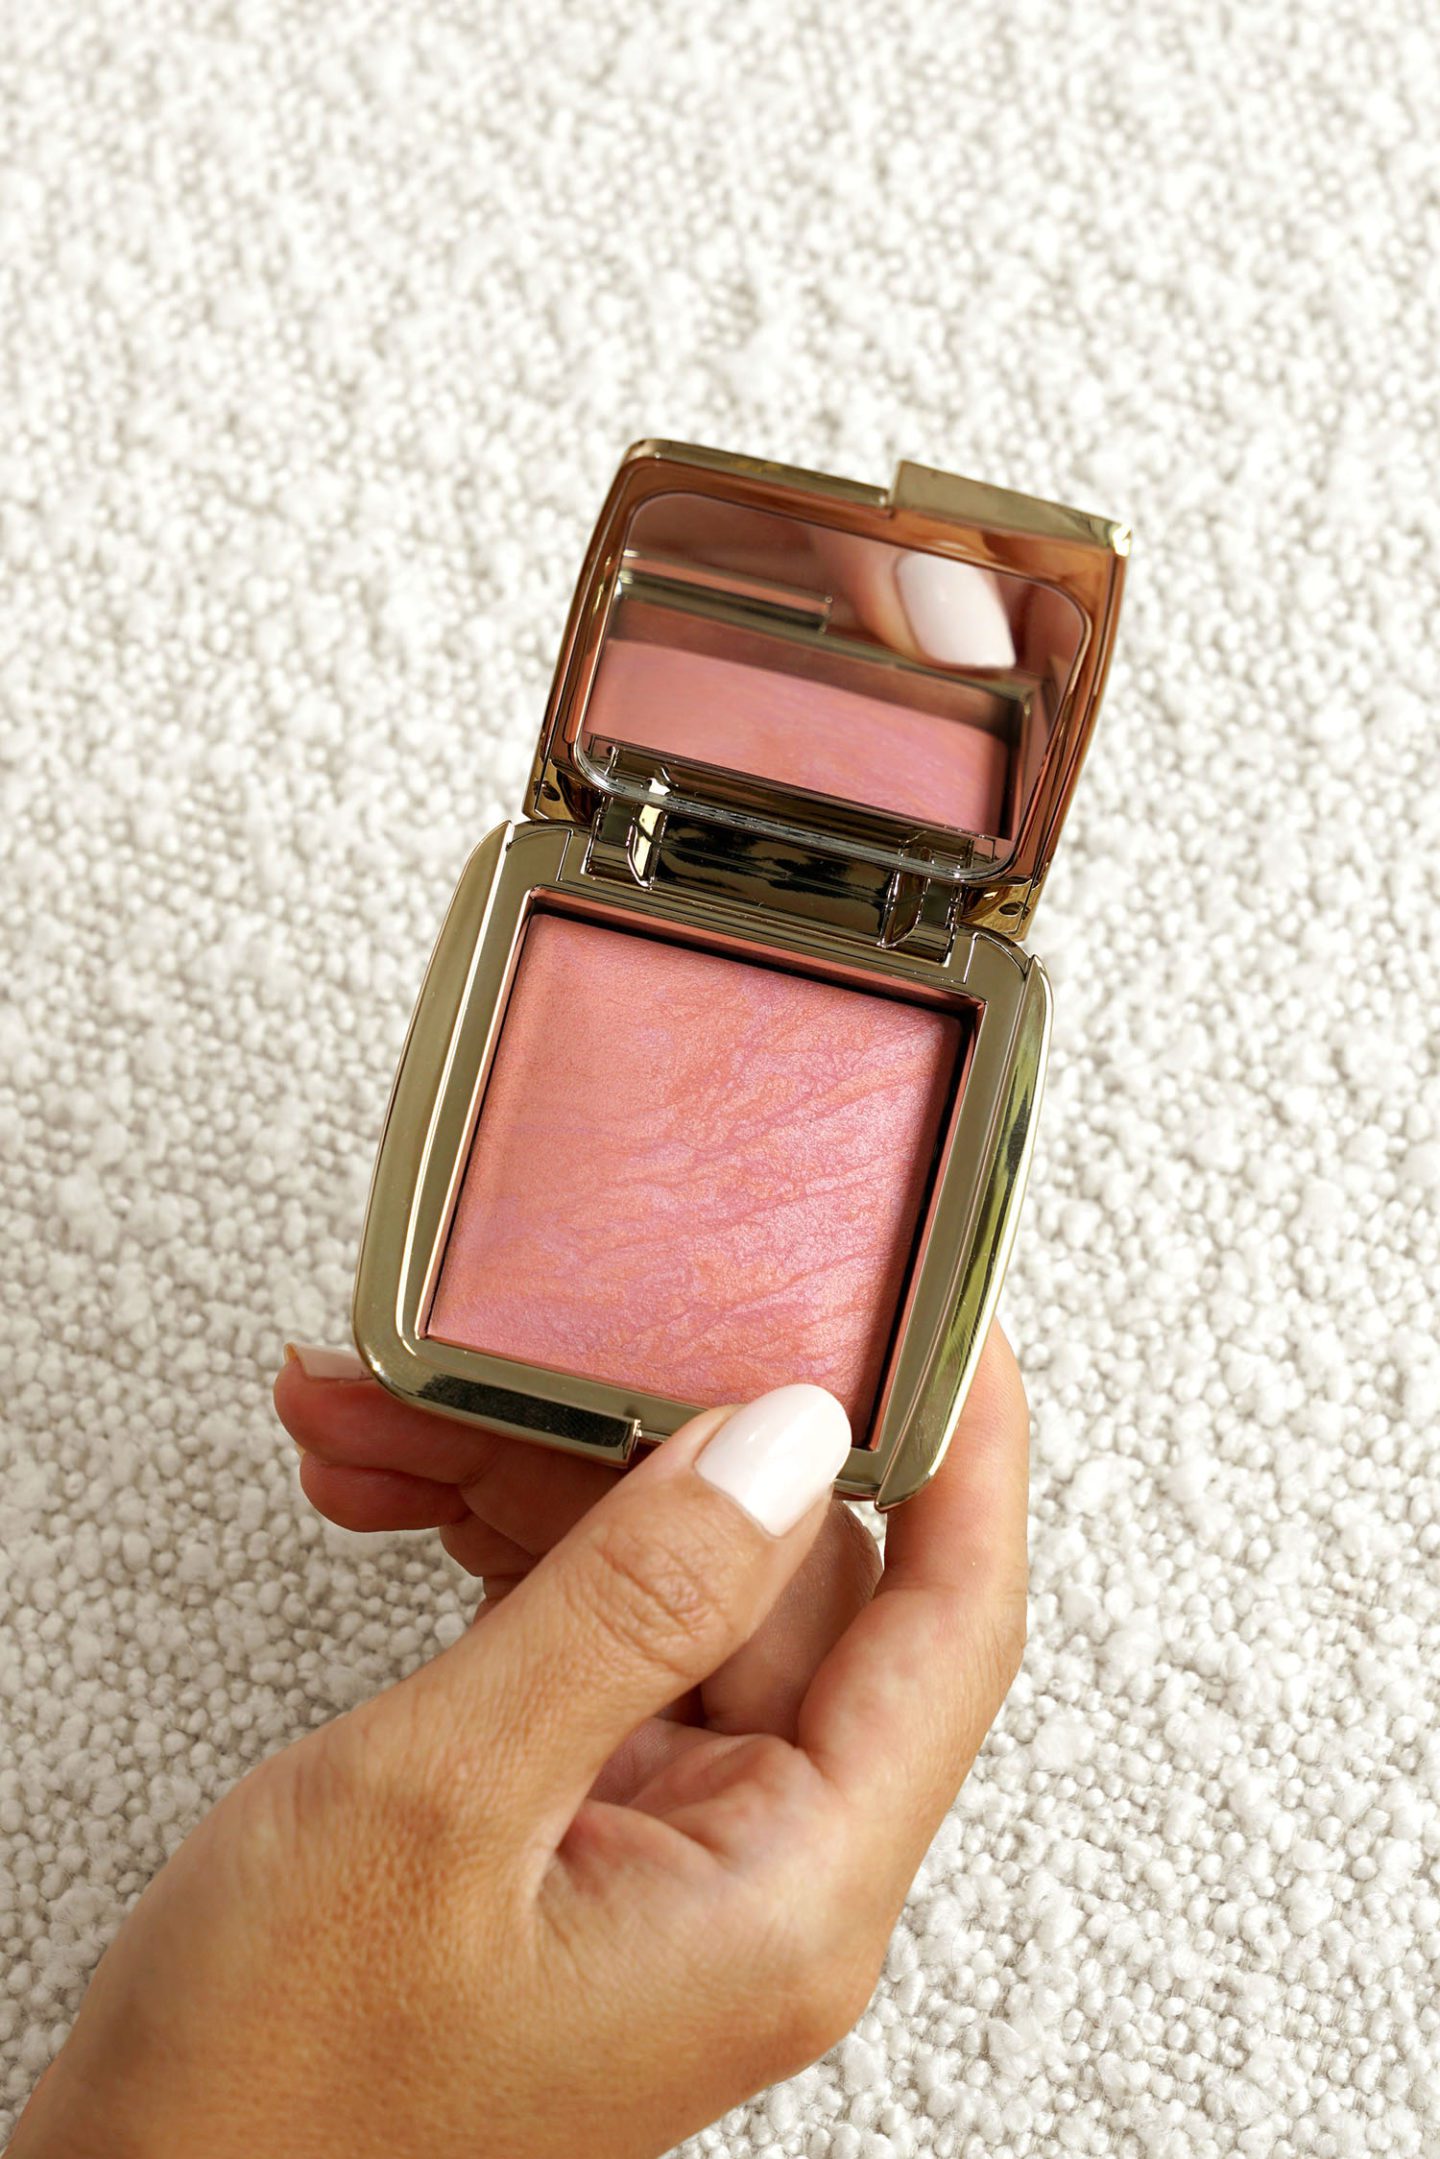 Hourglass Ambient Lighting Blush in Sublime Flush